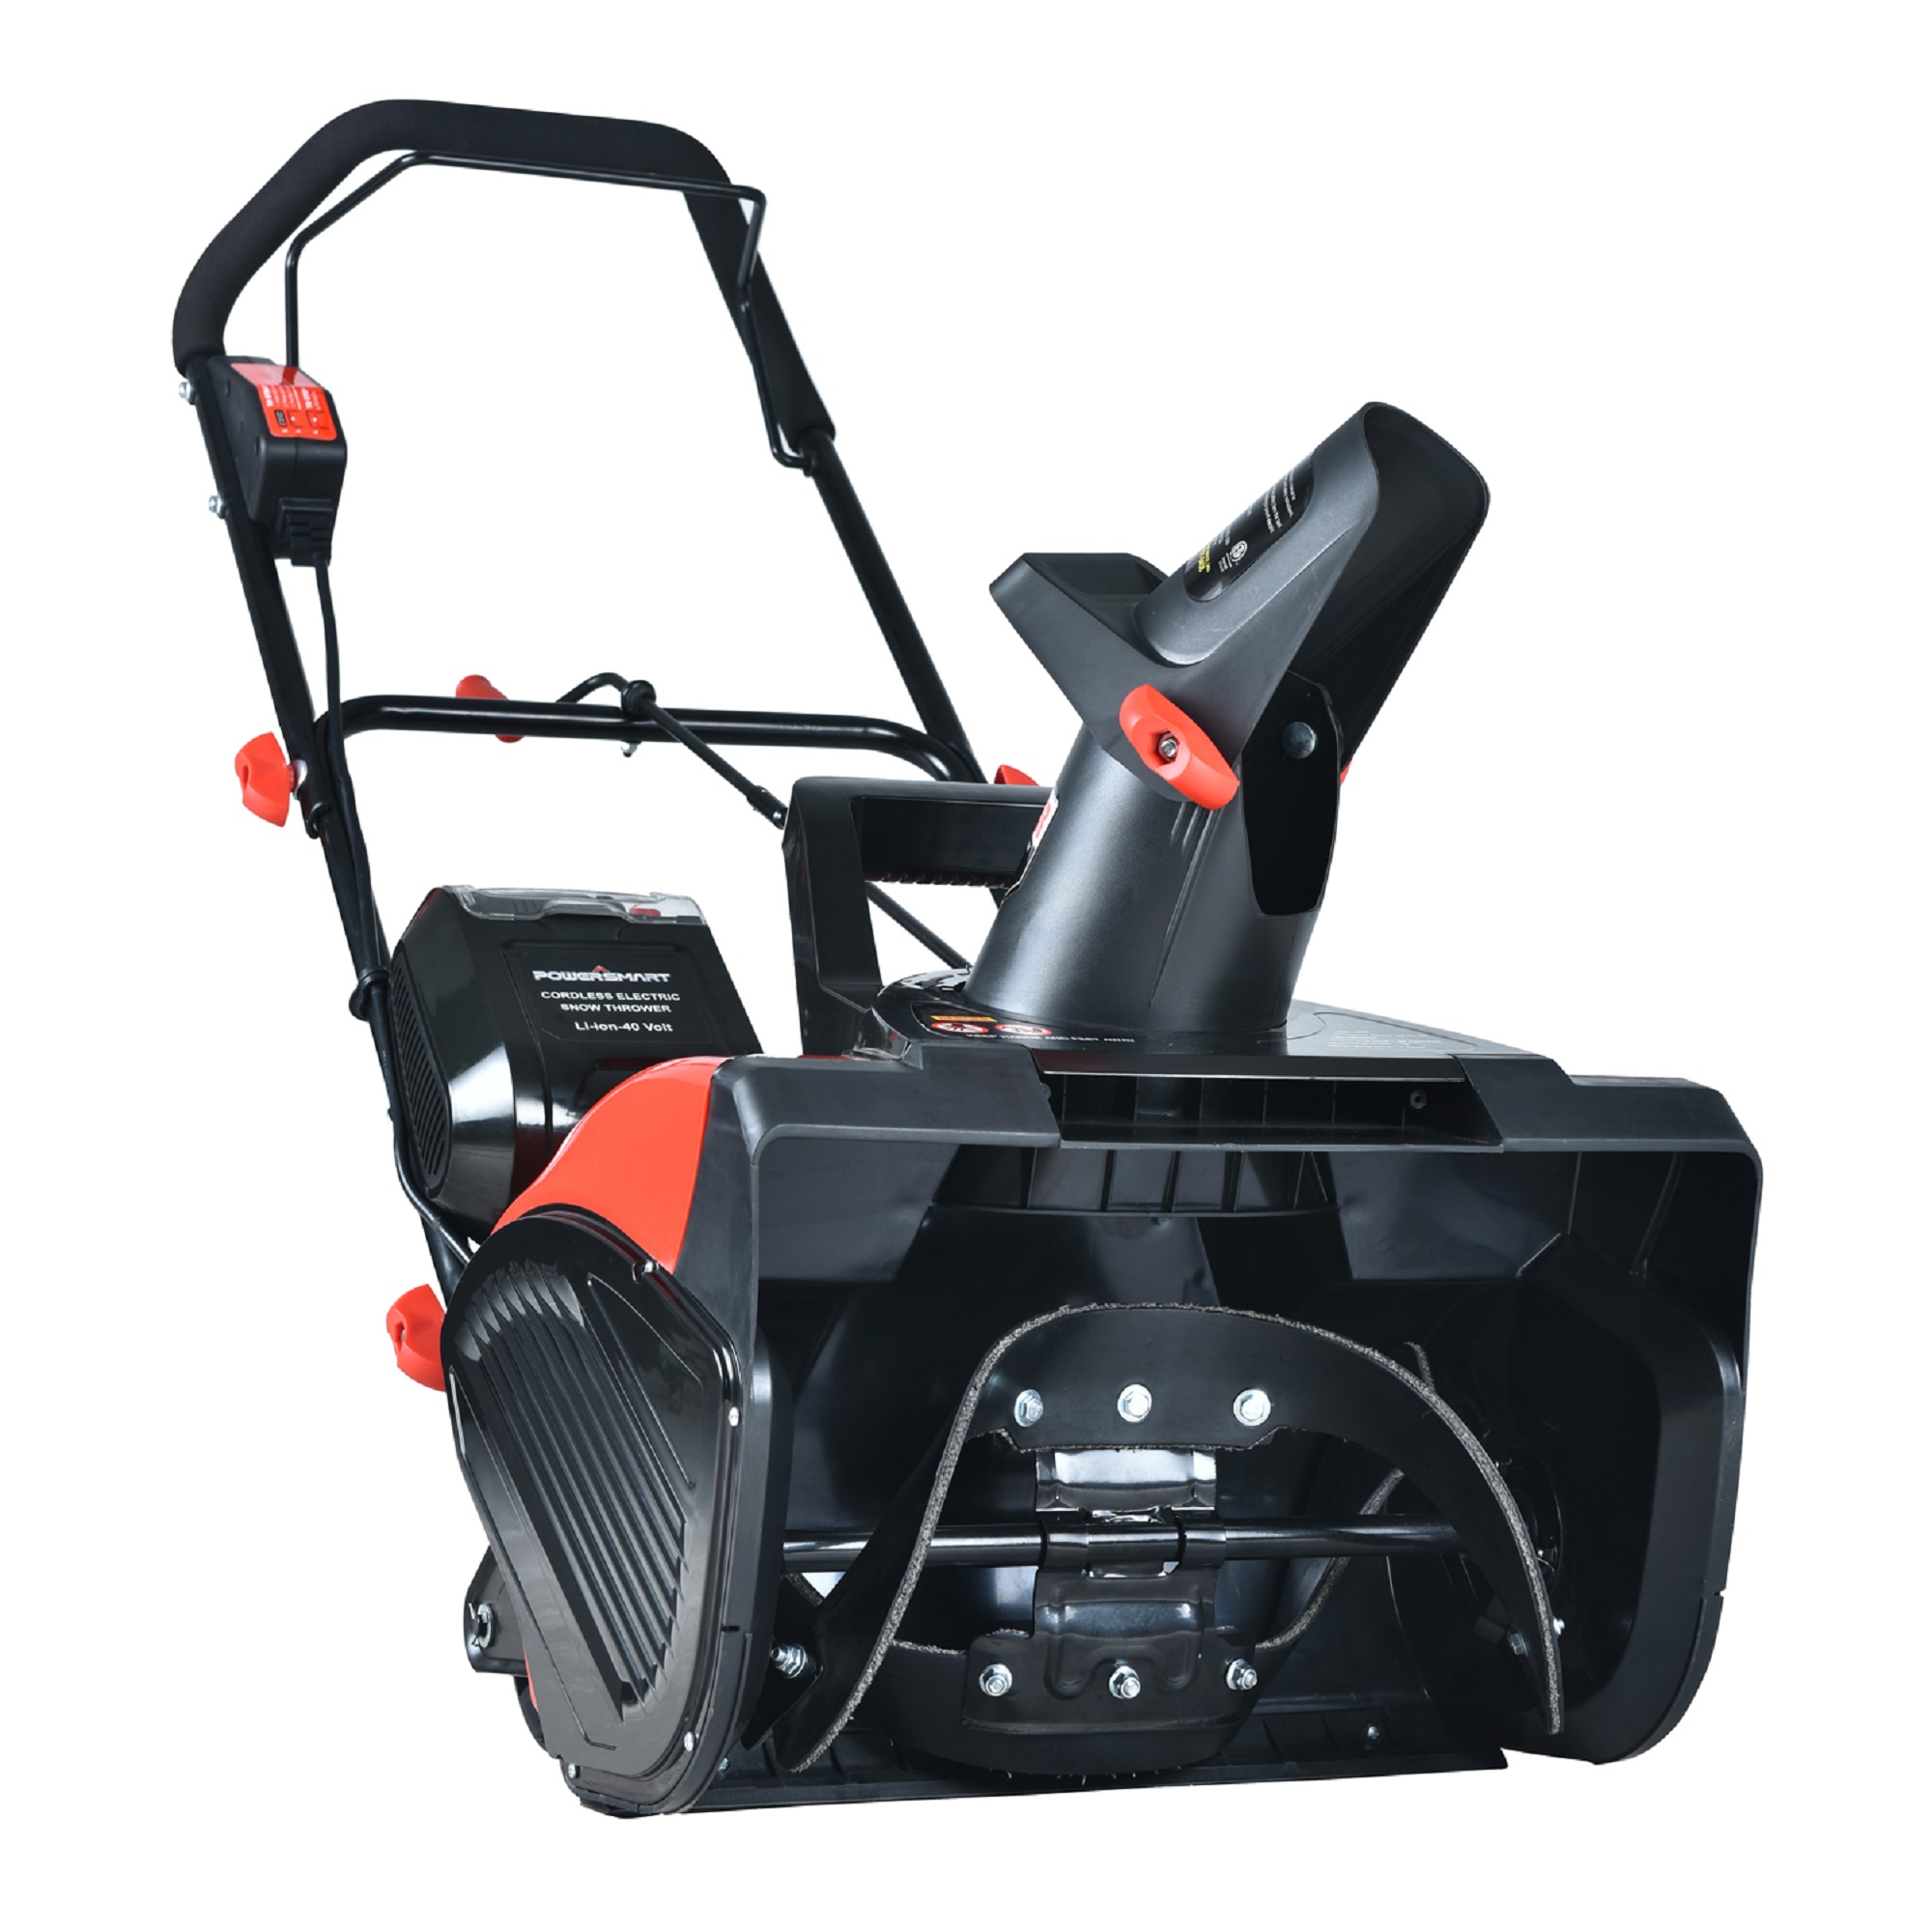 Powersmart 18 in. Cordless Lithium-Ion 40 Volt Snow Blower DB2401 - image 1 of 12